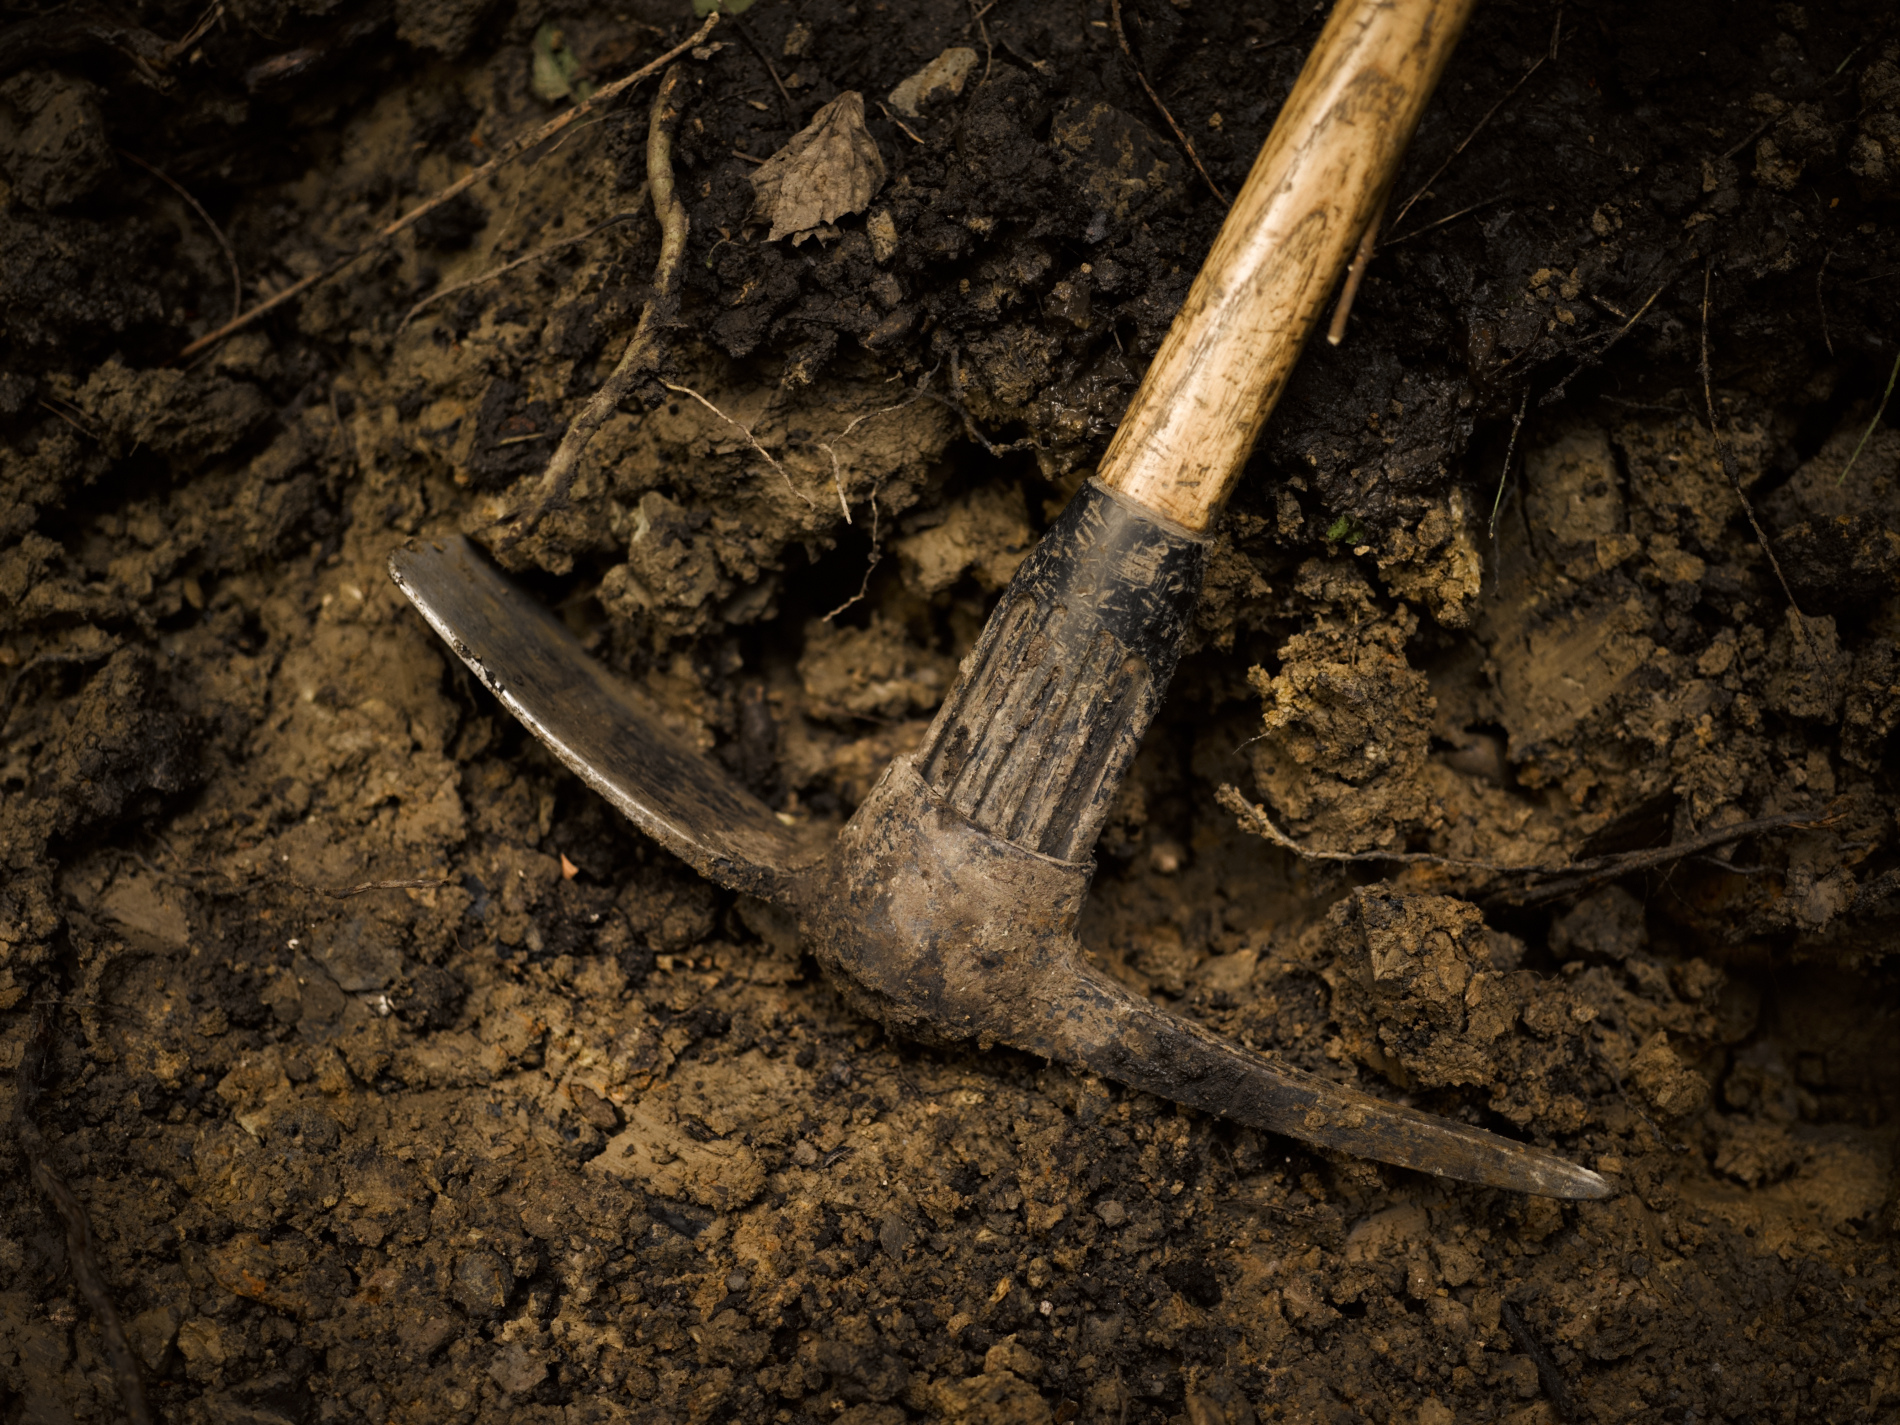 photograph of a pick axe on hiking trail